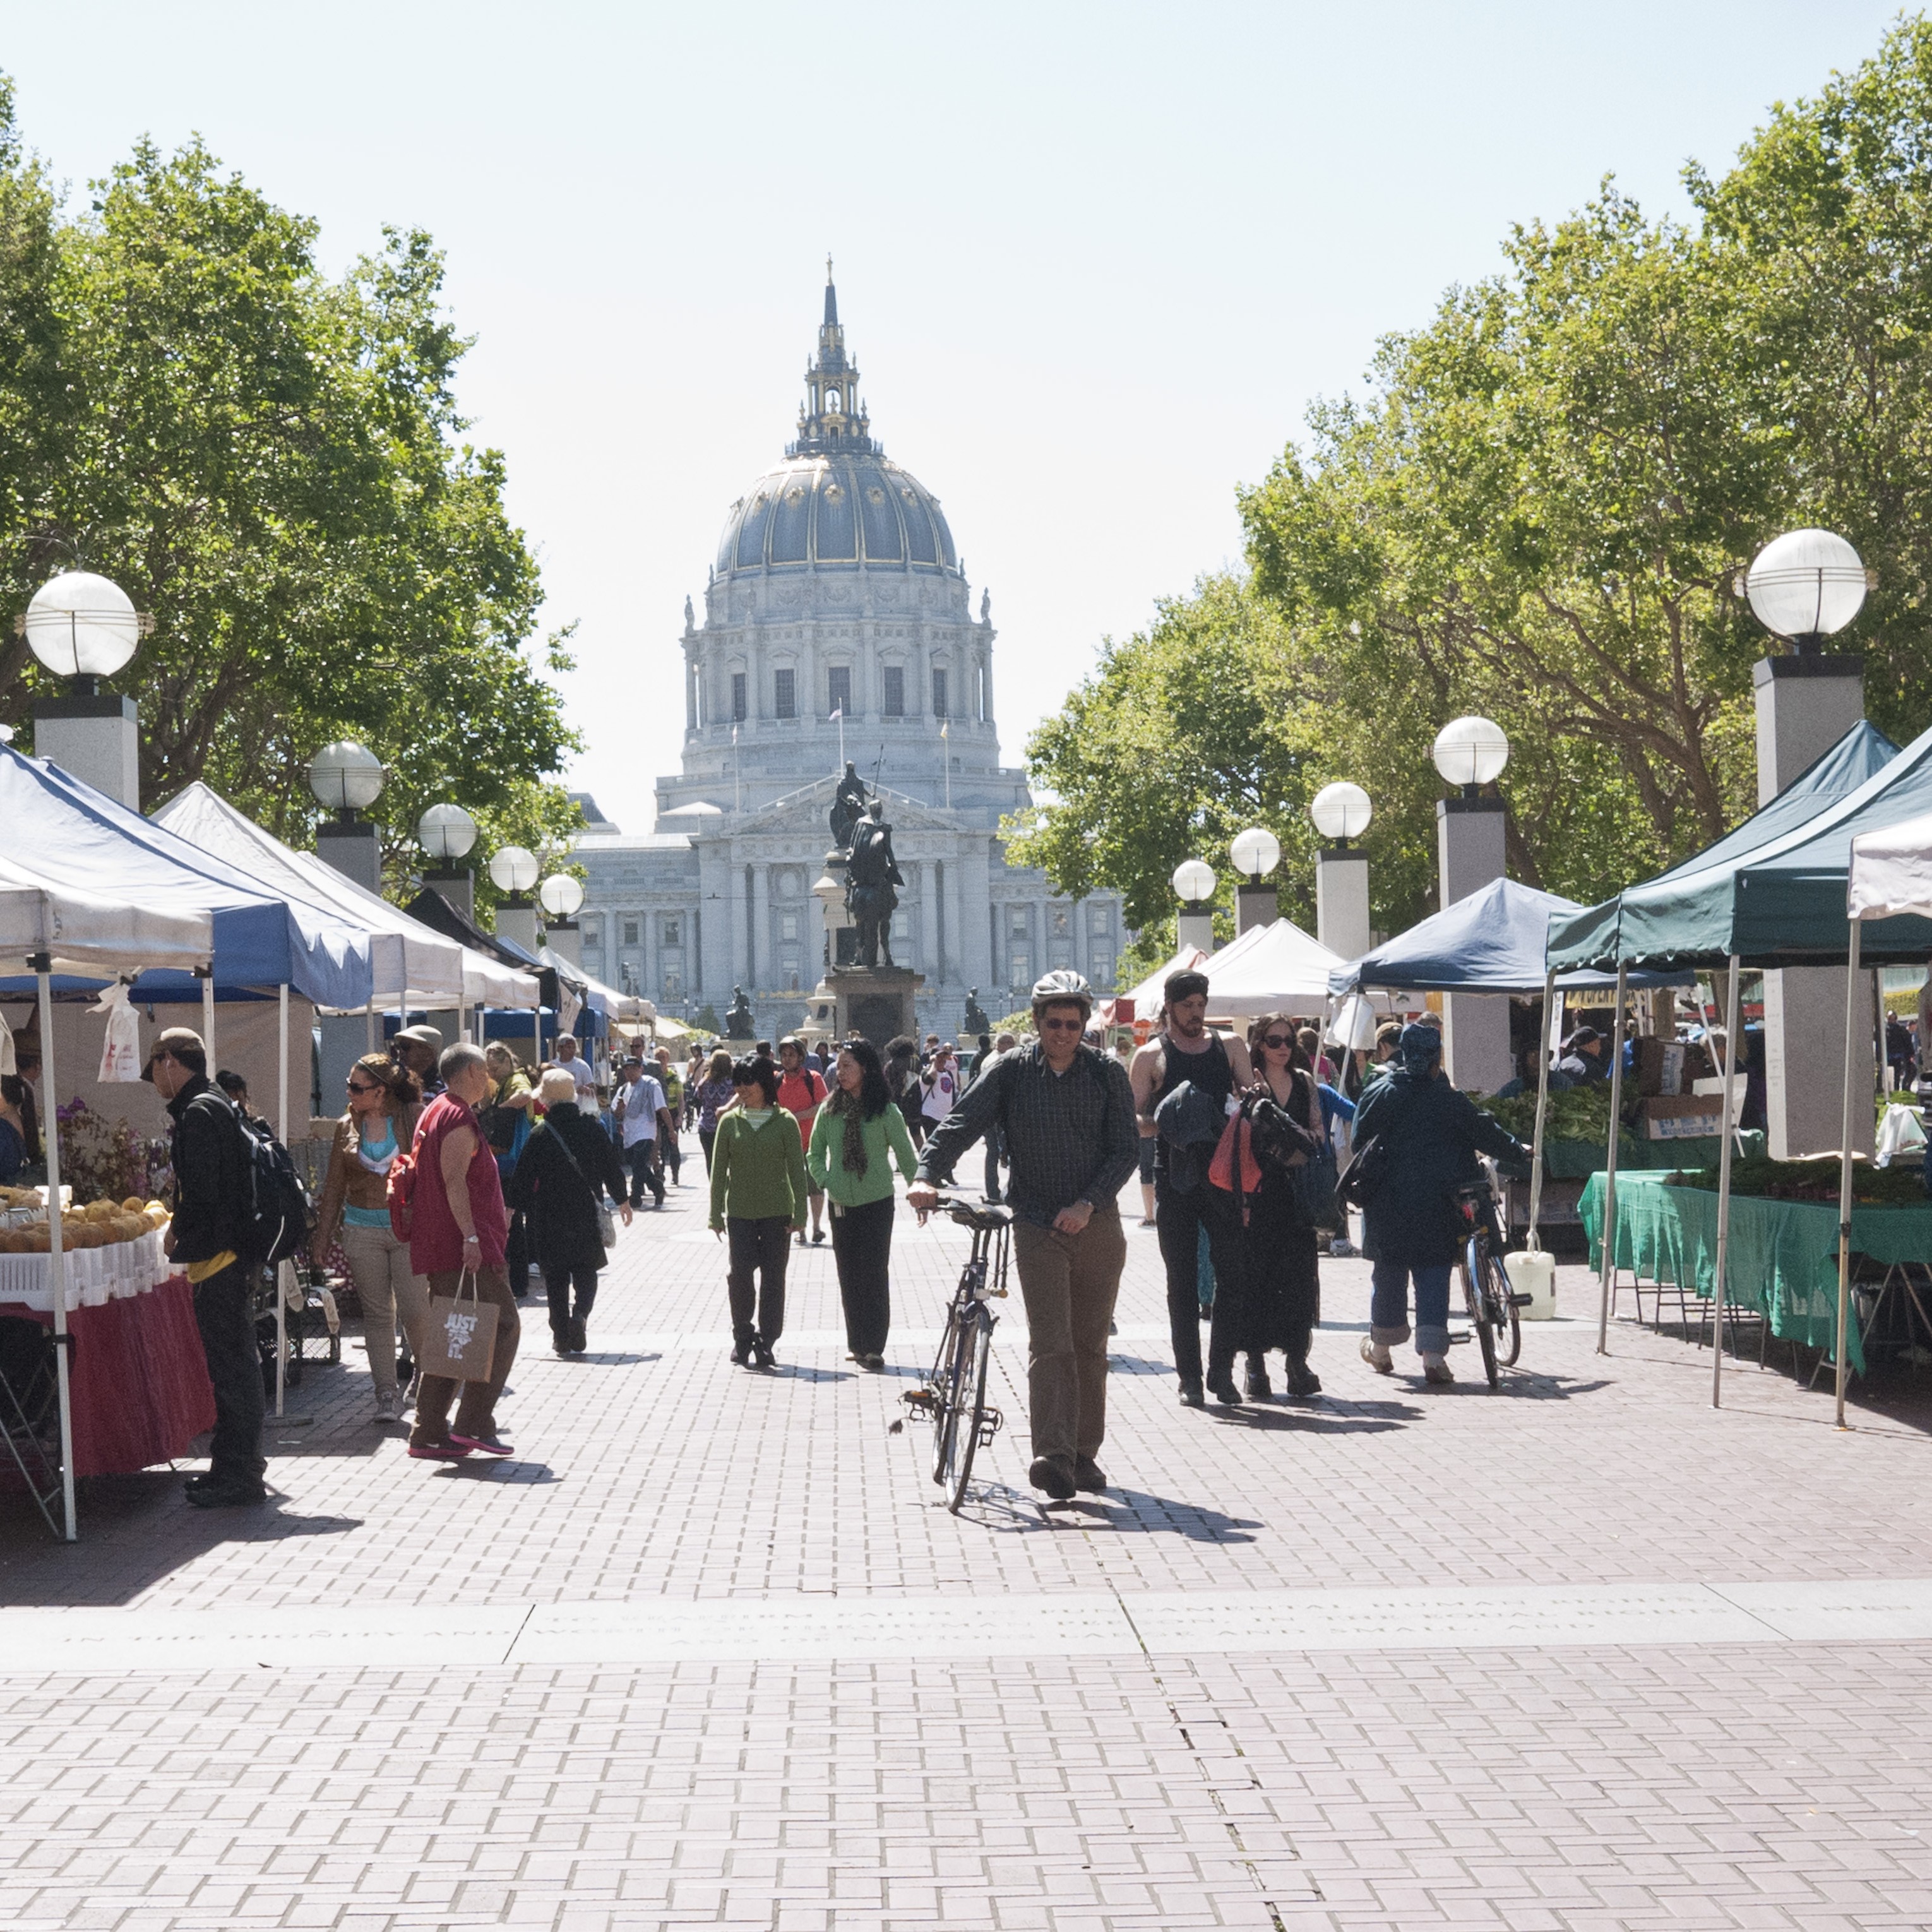 Farmers market stalls lining the street with SF City Hall in the background.